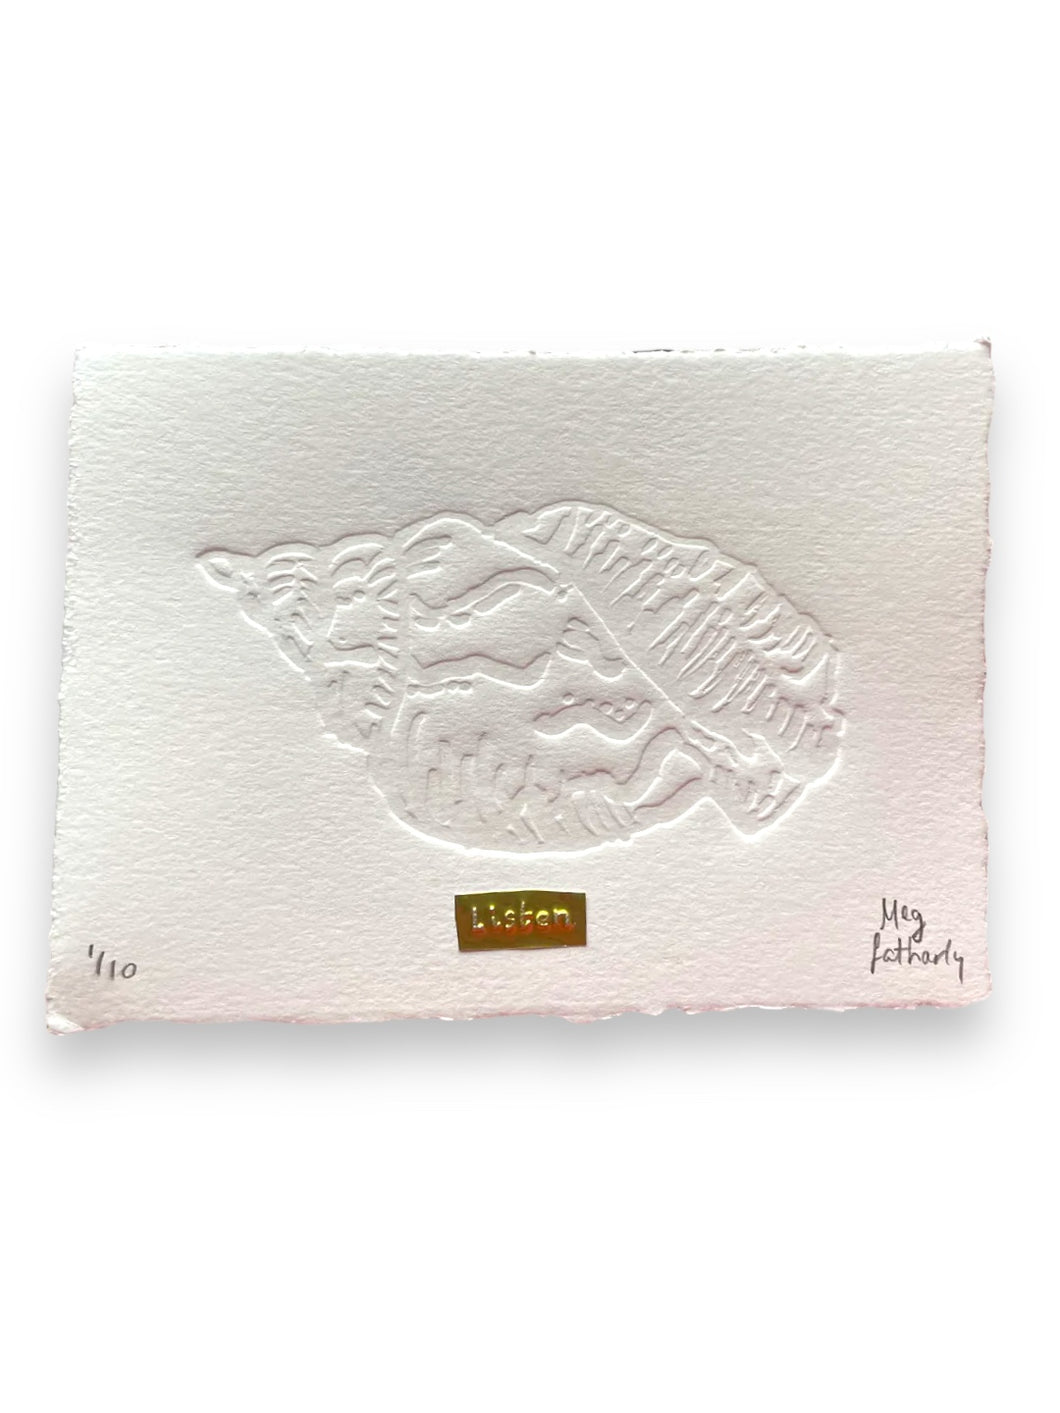 Limited Edition Conch Listen Shell Embossing with Listen Brass detail 10cm x 15cm (A6)